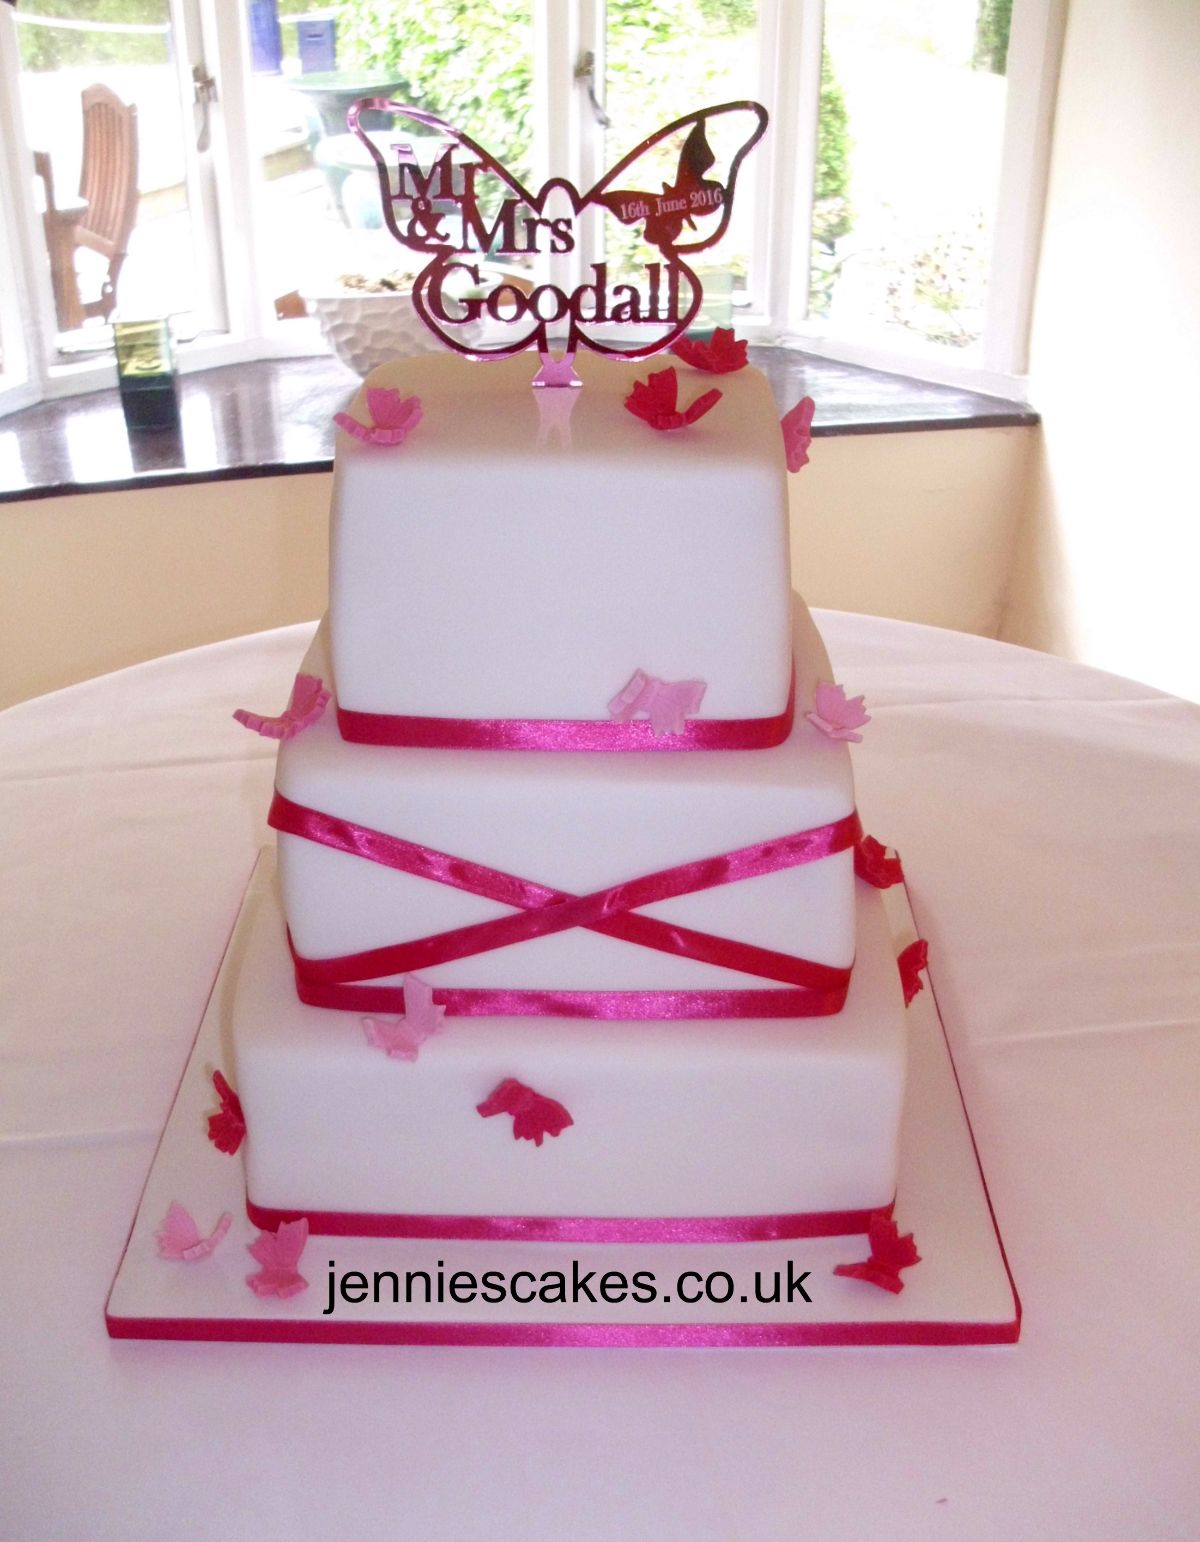 Jennie's cake's and catering-Image-57